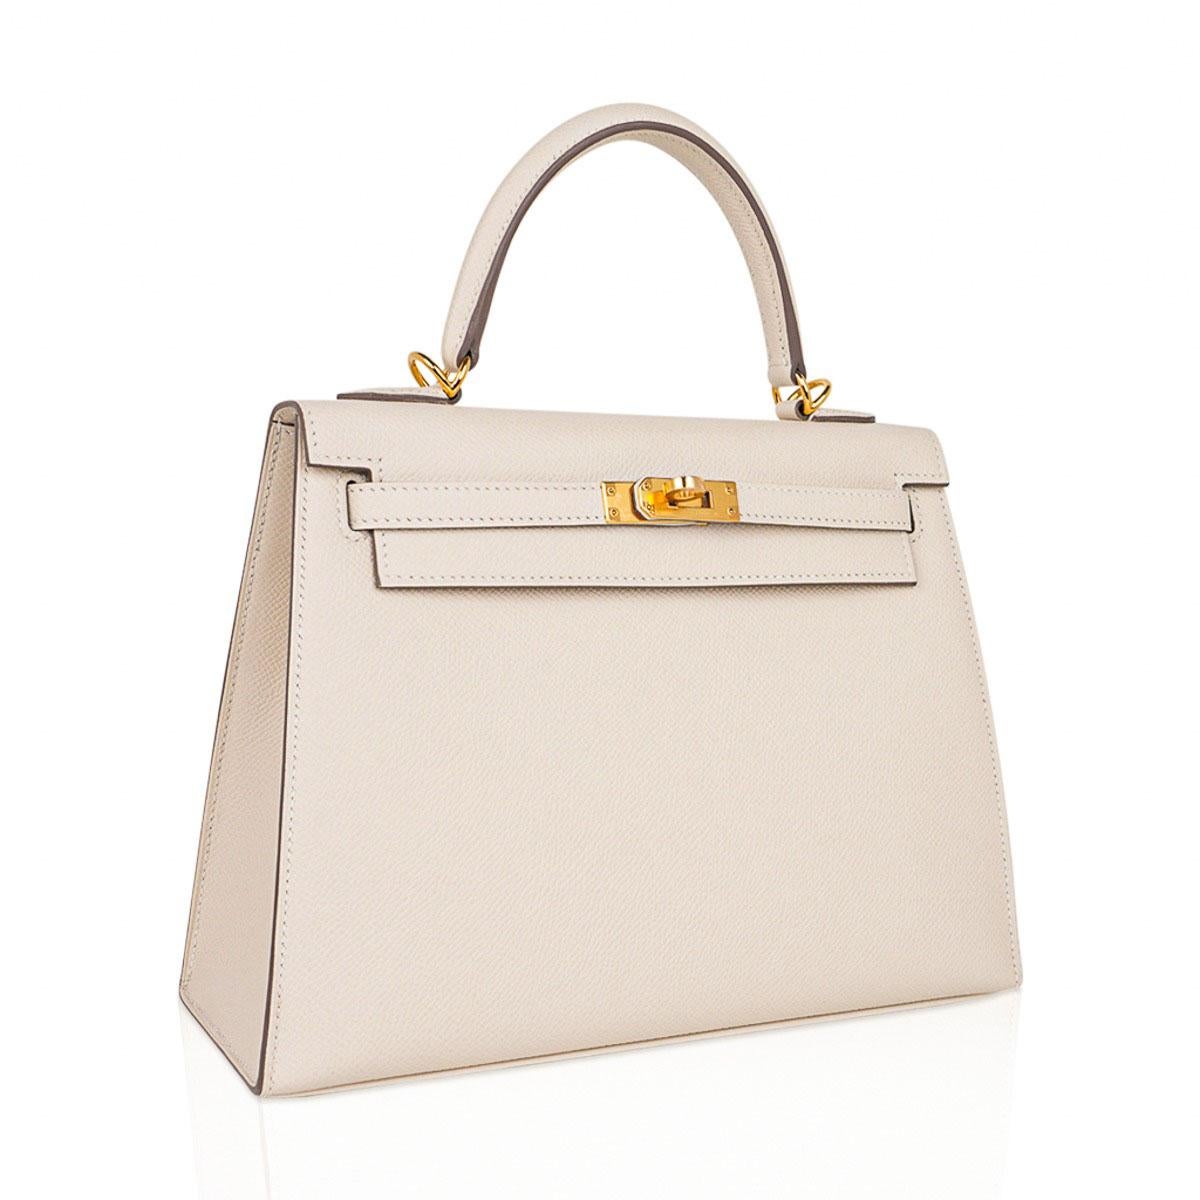 Mightychic offers an Hermes 25 Kelly Sellier bag features creamy neutral perfection - Craie.
This colour is fast becoming a unicorn and a collectors treasure!
Created in Epsom leather.
Rich with Gold hardware.  
Comes with signature Hermes box,